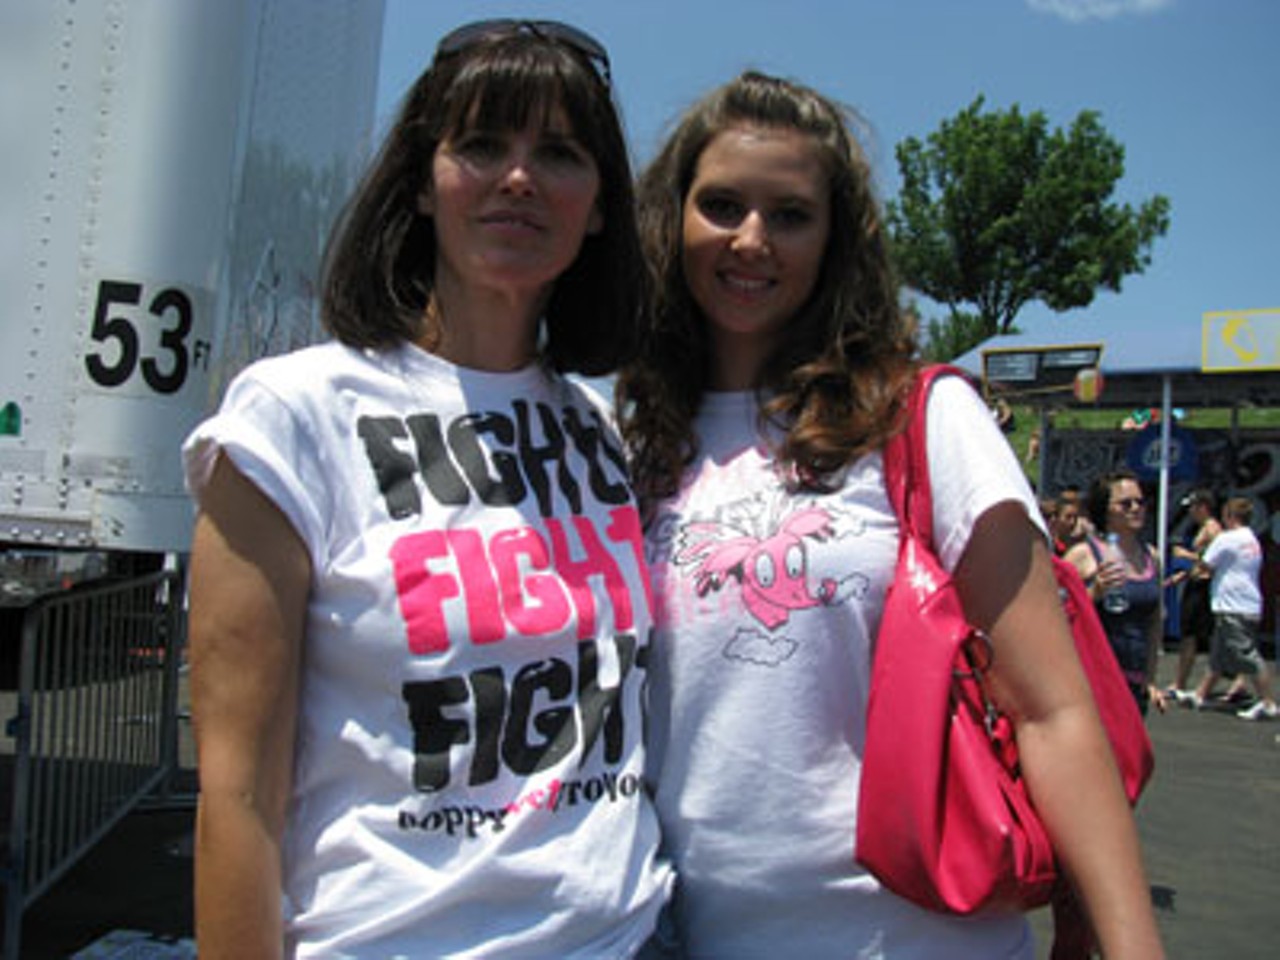 Local pop-punks Fight! Fight! Fight! are on several dates of this year's Warped Tour. Bassist Jerry Rose's mom and sister show their pride.